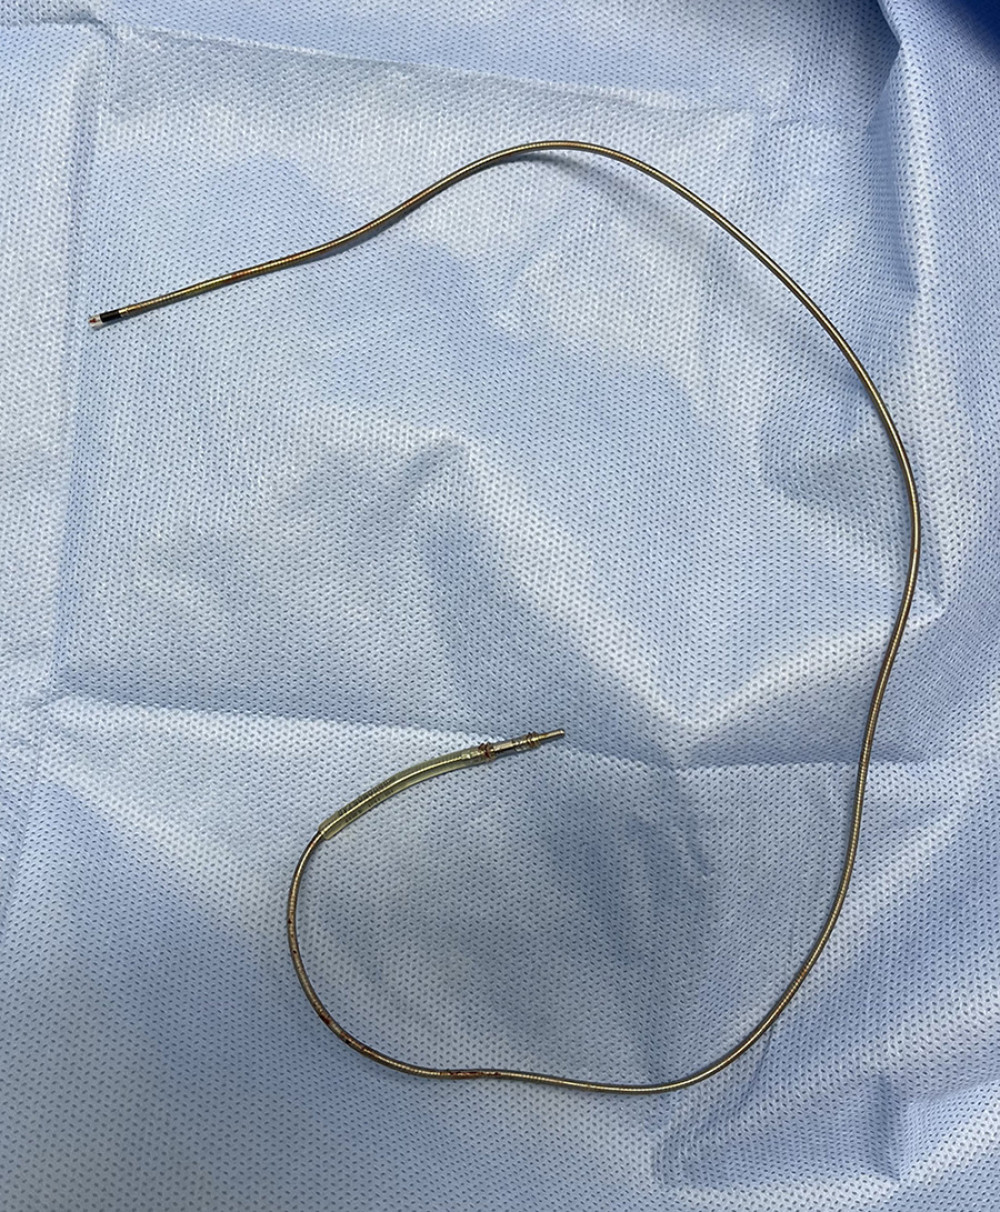 The removed ventricular lead. No thrombus or fibrous tissue adherence was identified.